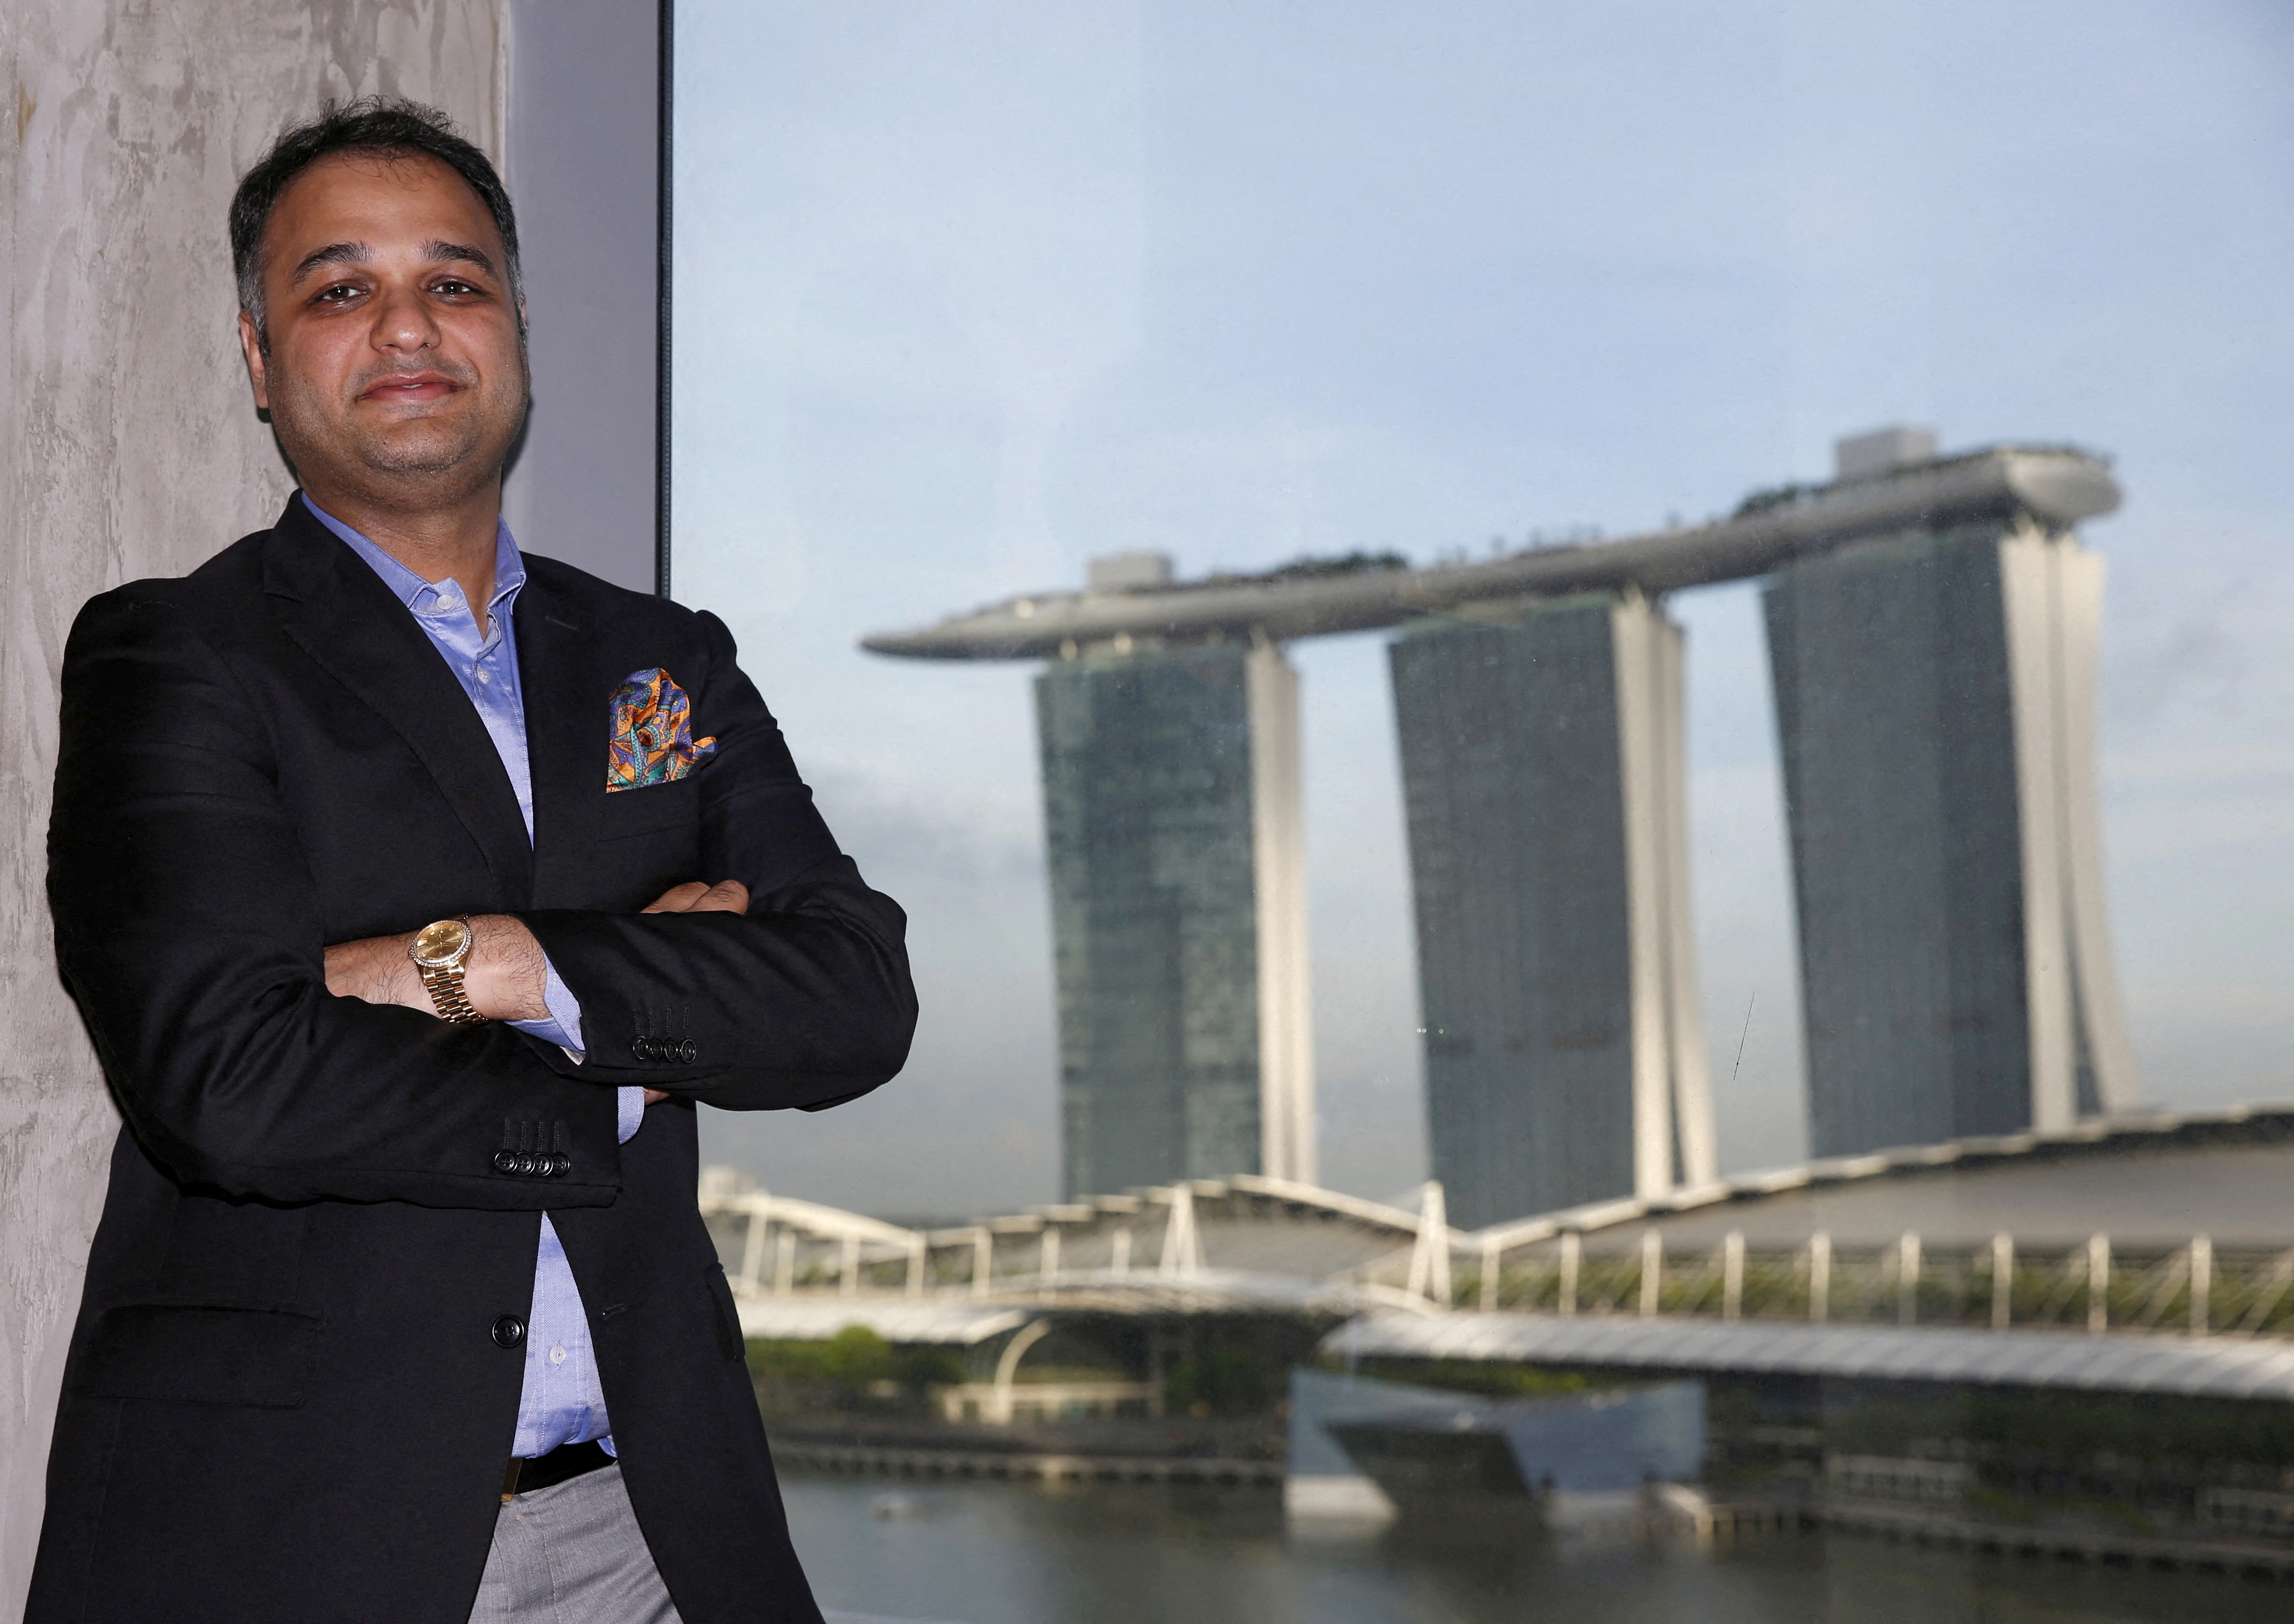 Chairman of UD Group Prateek Gupta poses in his Singapore office